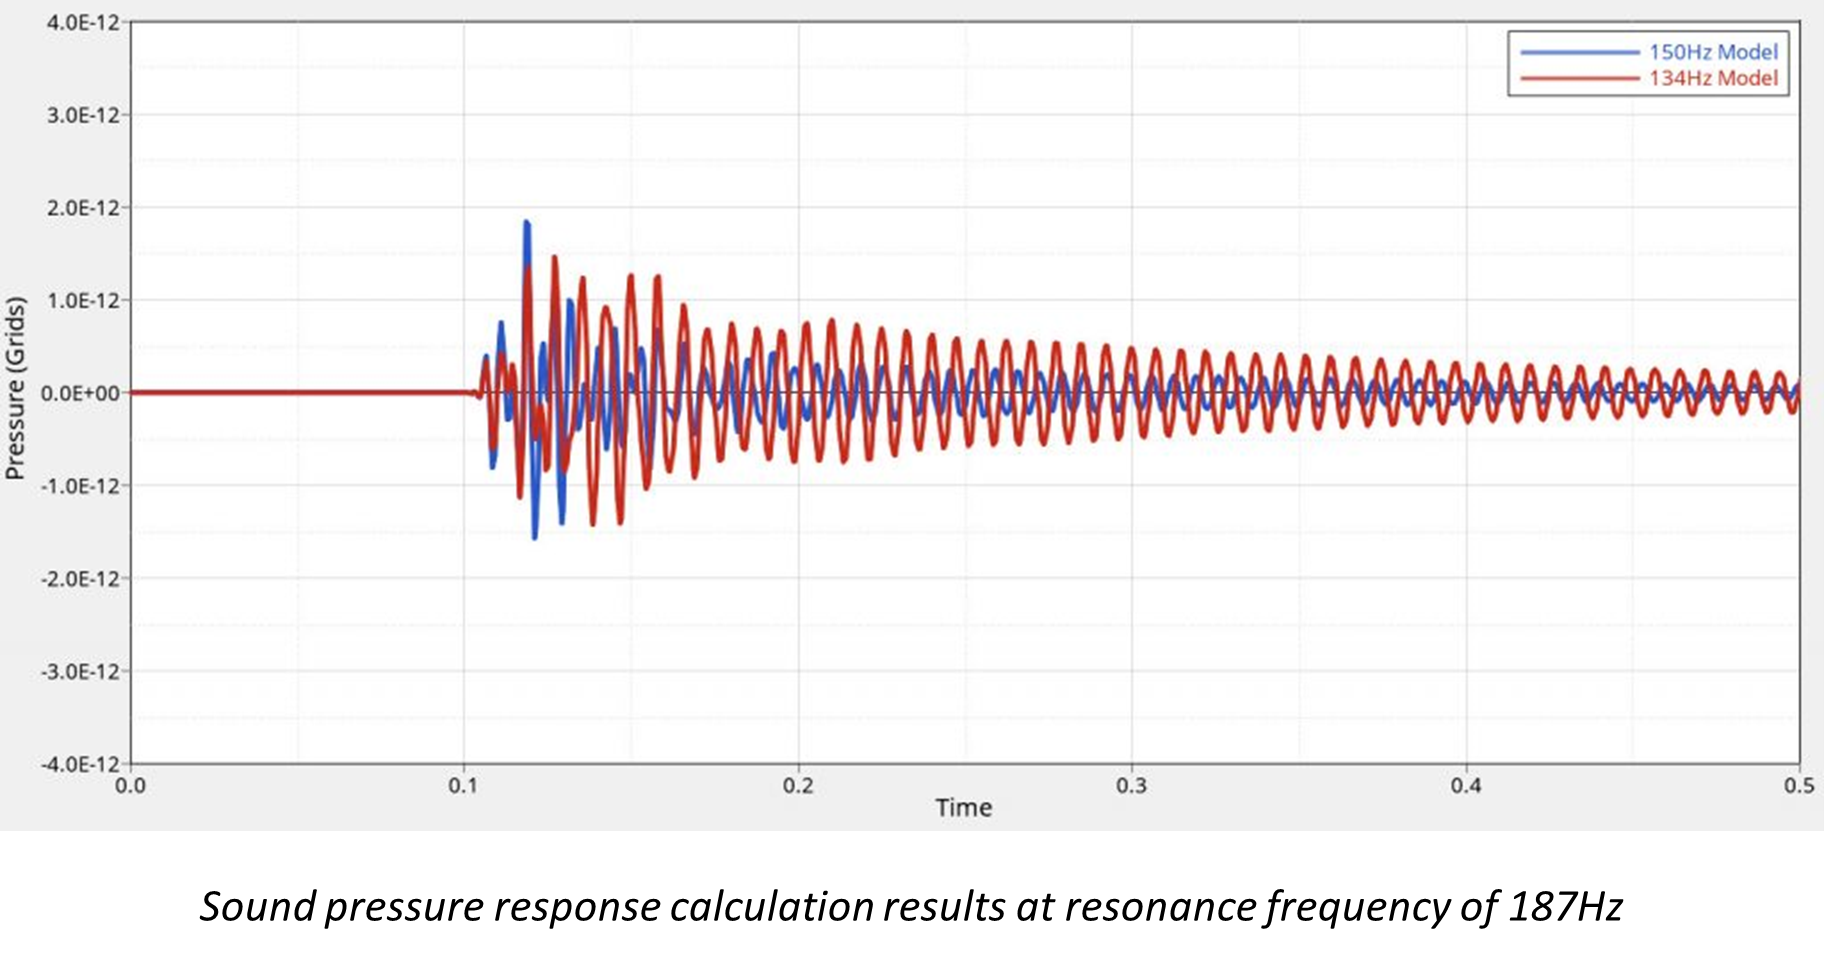 Sound pressure response calculation results at resonance frequency of 187 Hz 